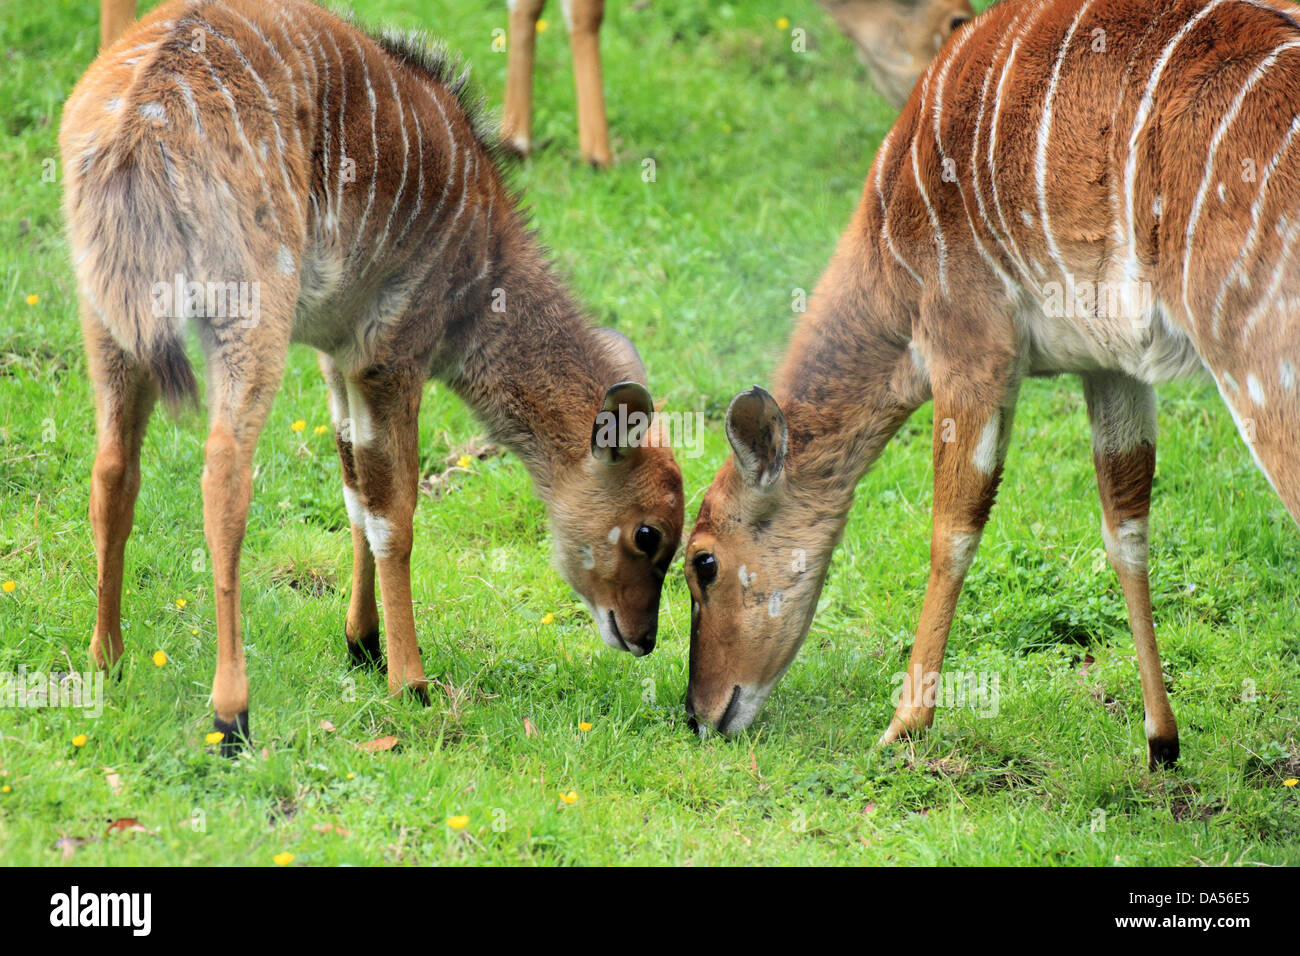 Nayla (Tragelaphus angasii) with their young embracing Stock Photo